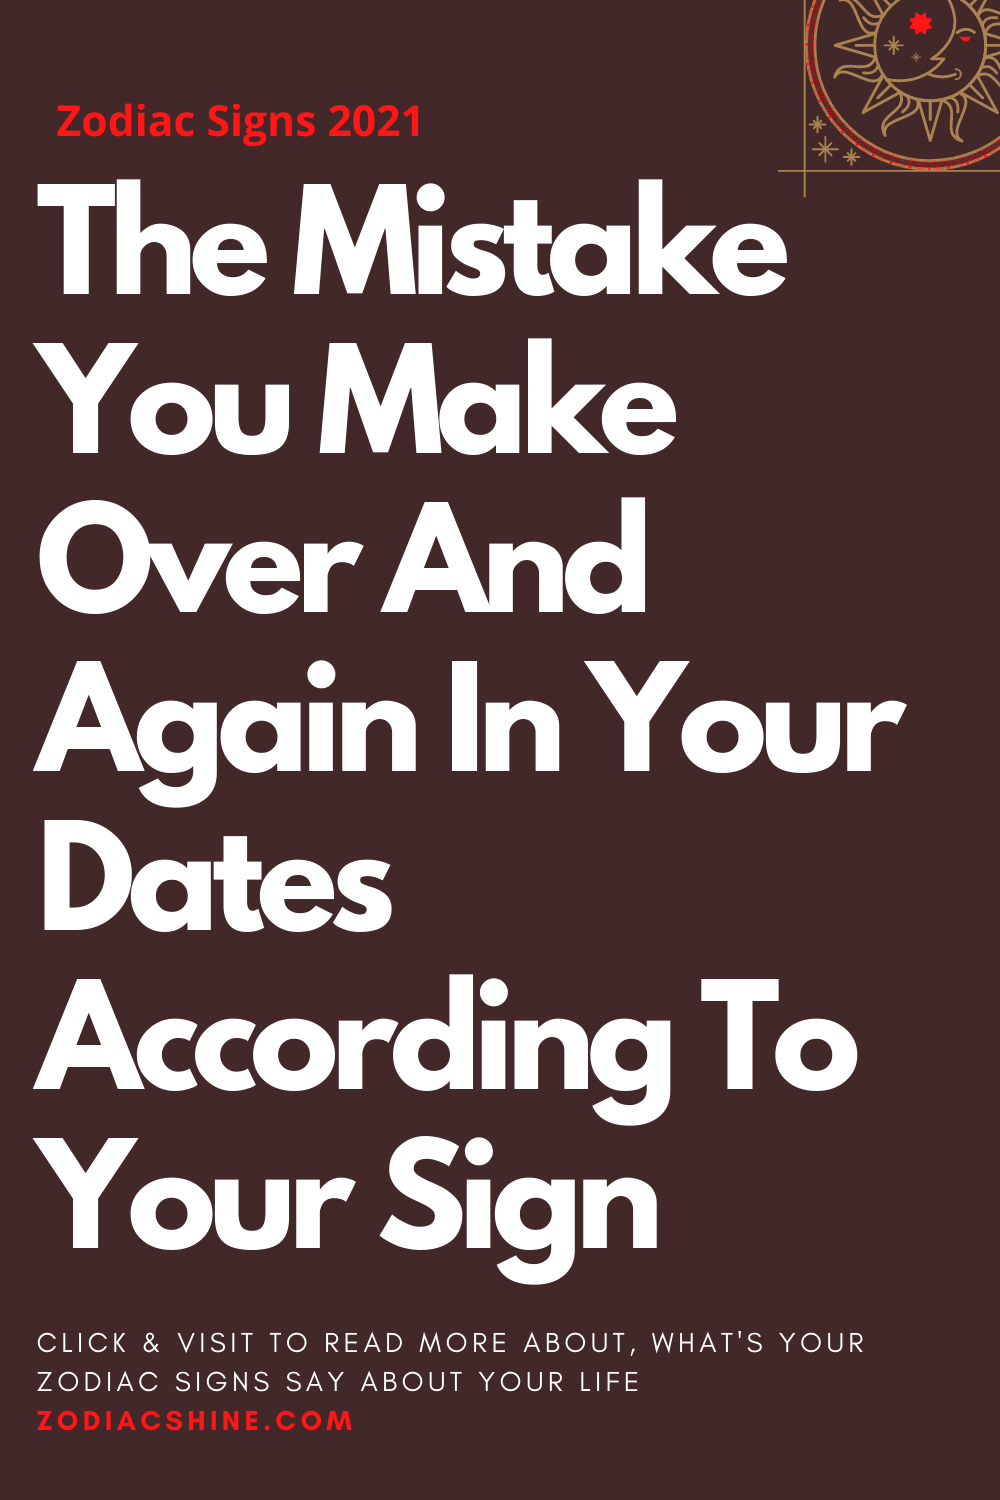 The Mistake You Make Over And Again In Your Dates According To Your Sign